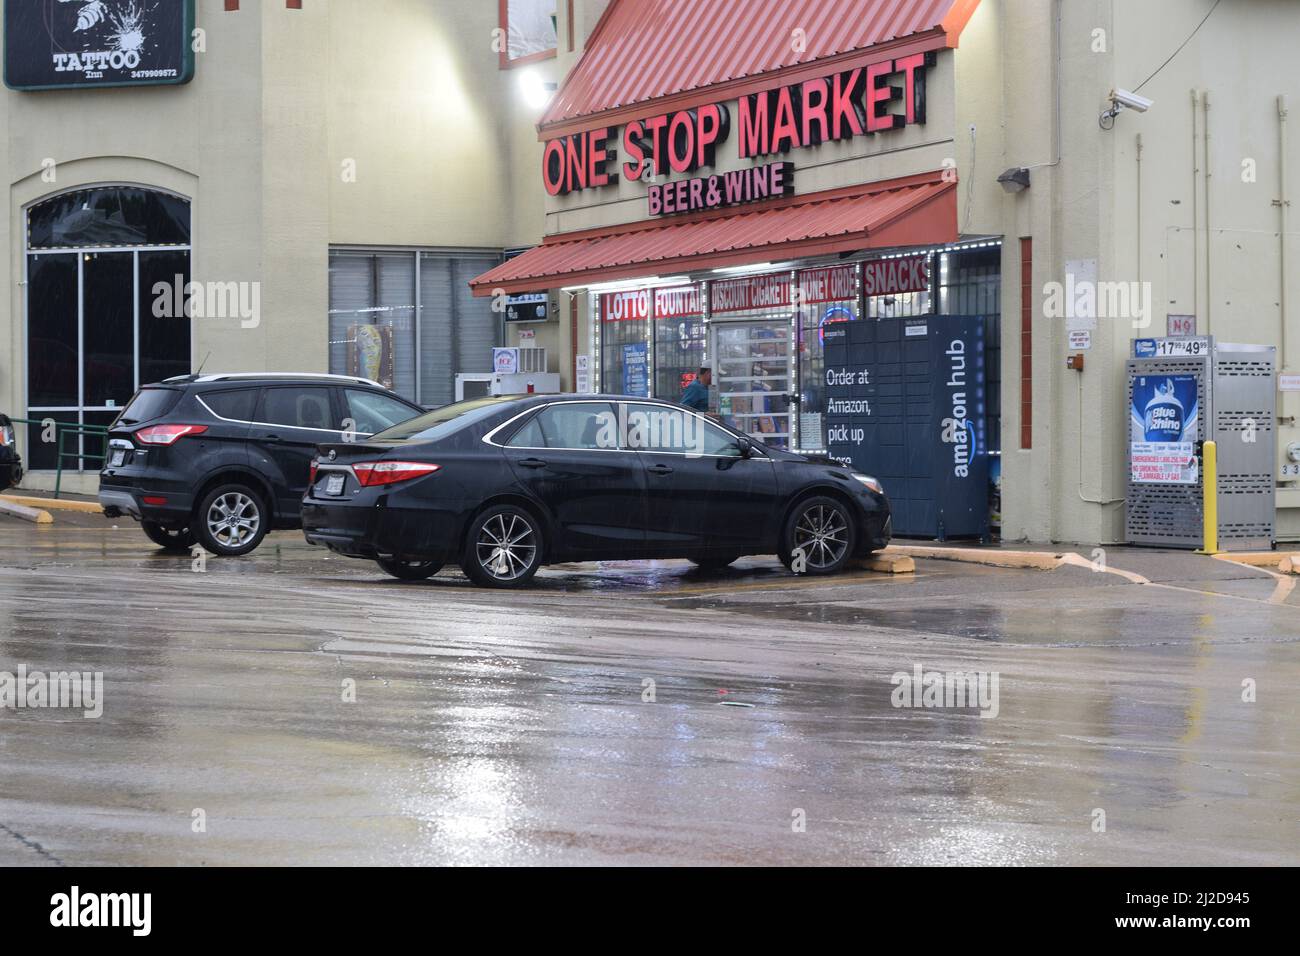 Man entering the One Stop Market convenience store on a rainy day in Irvng, TX Stock Photo